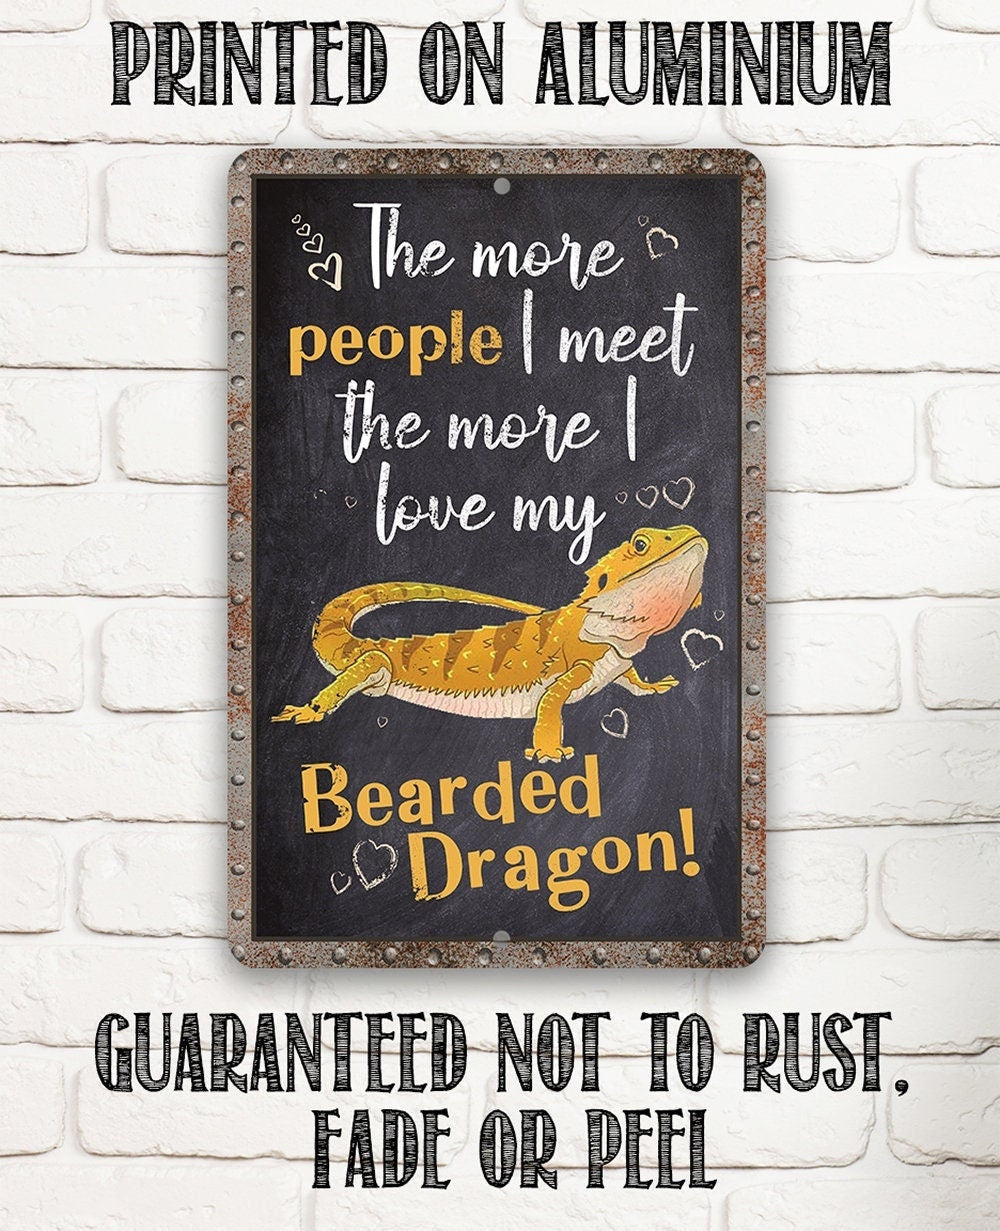 The More People I Meet The More I Love My Bearded Dragon - Metal Sign Metal Sign Lone Star Art 